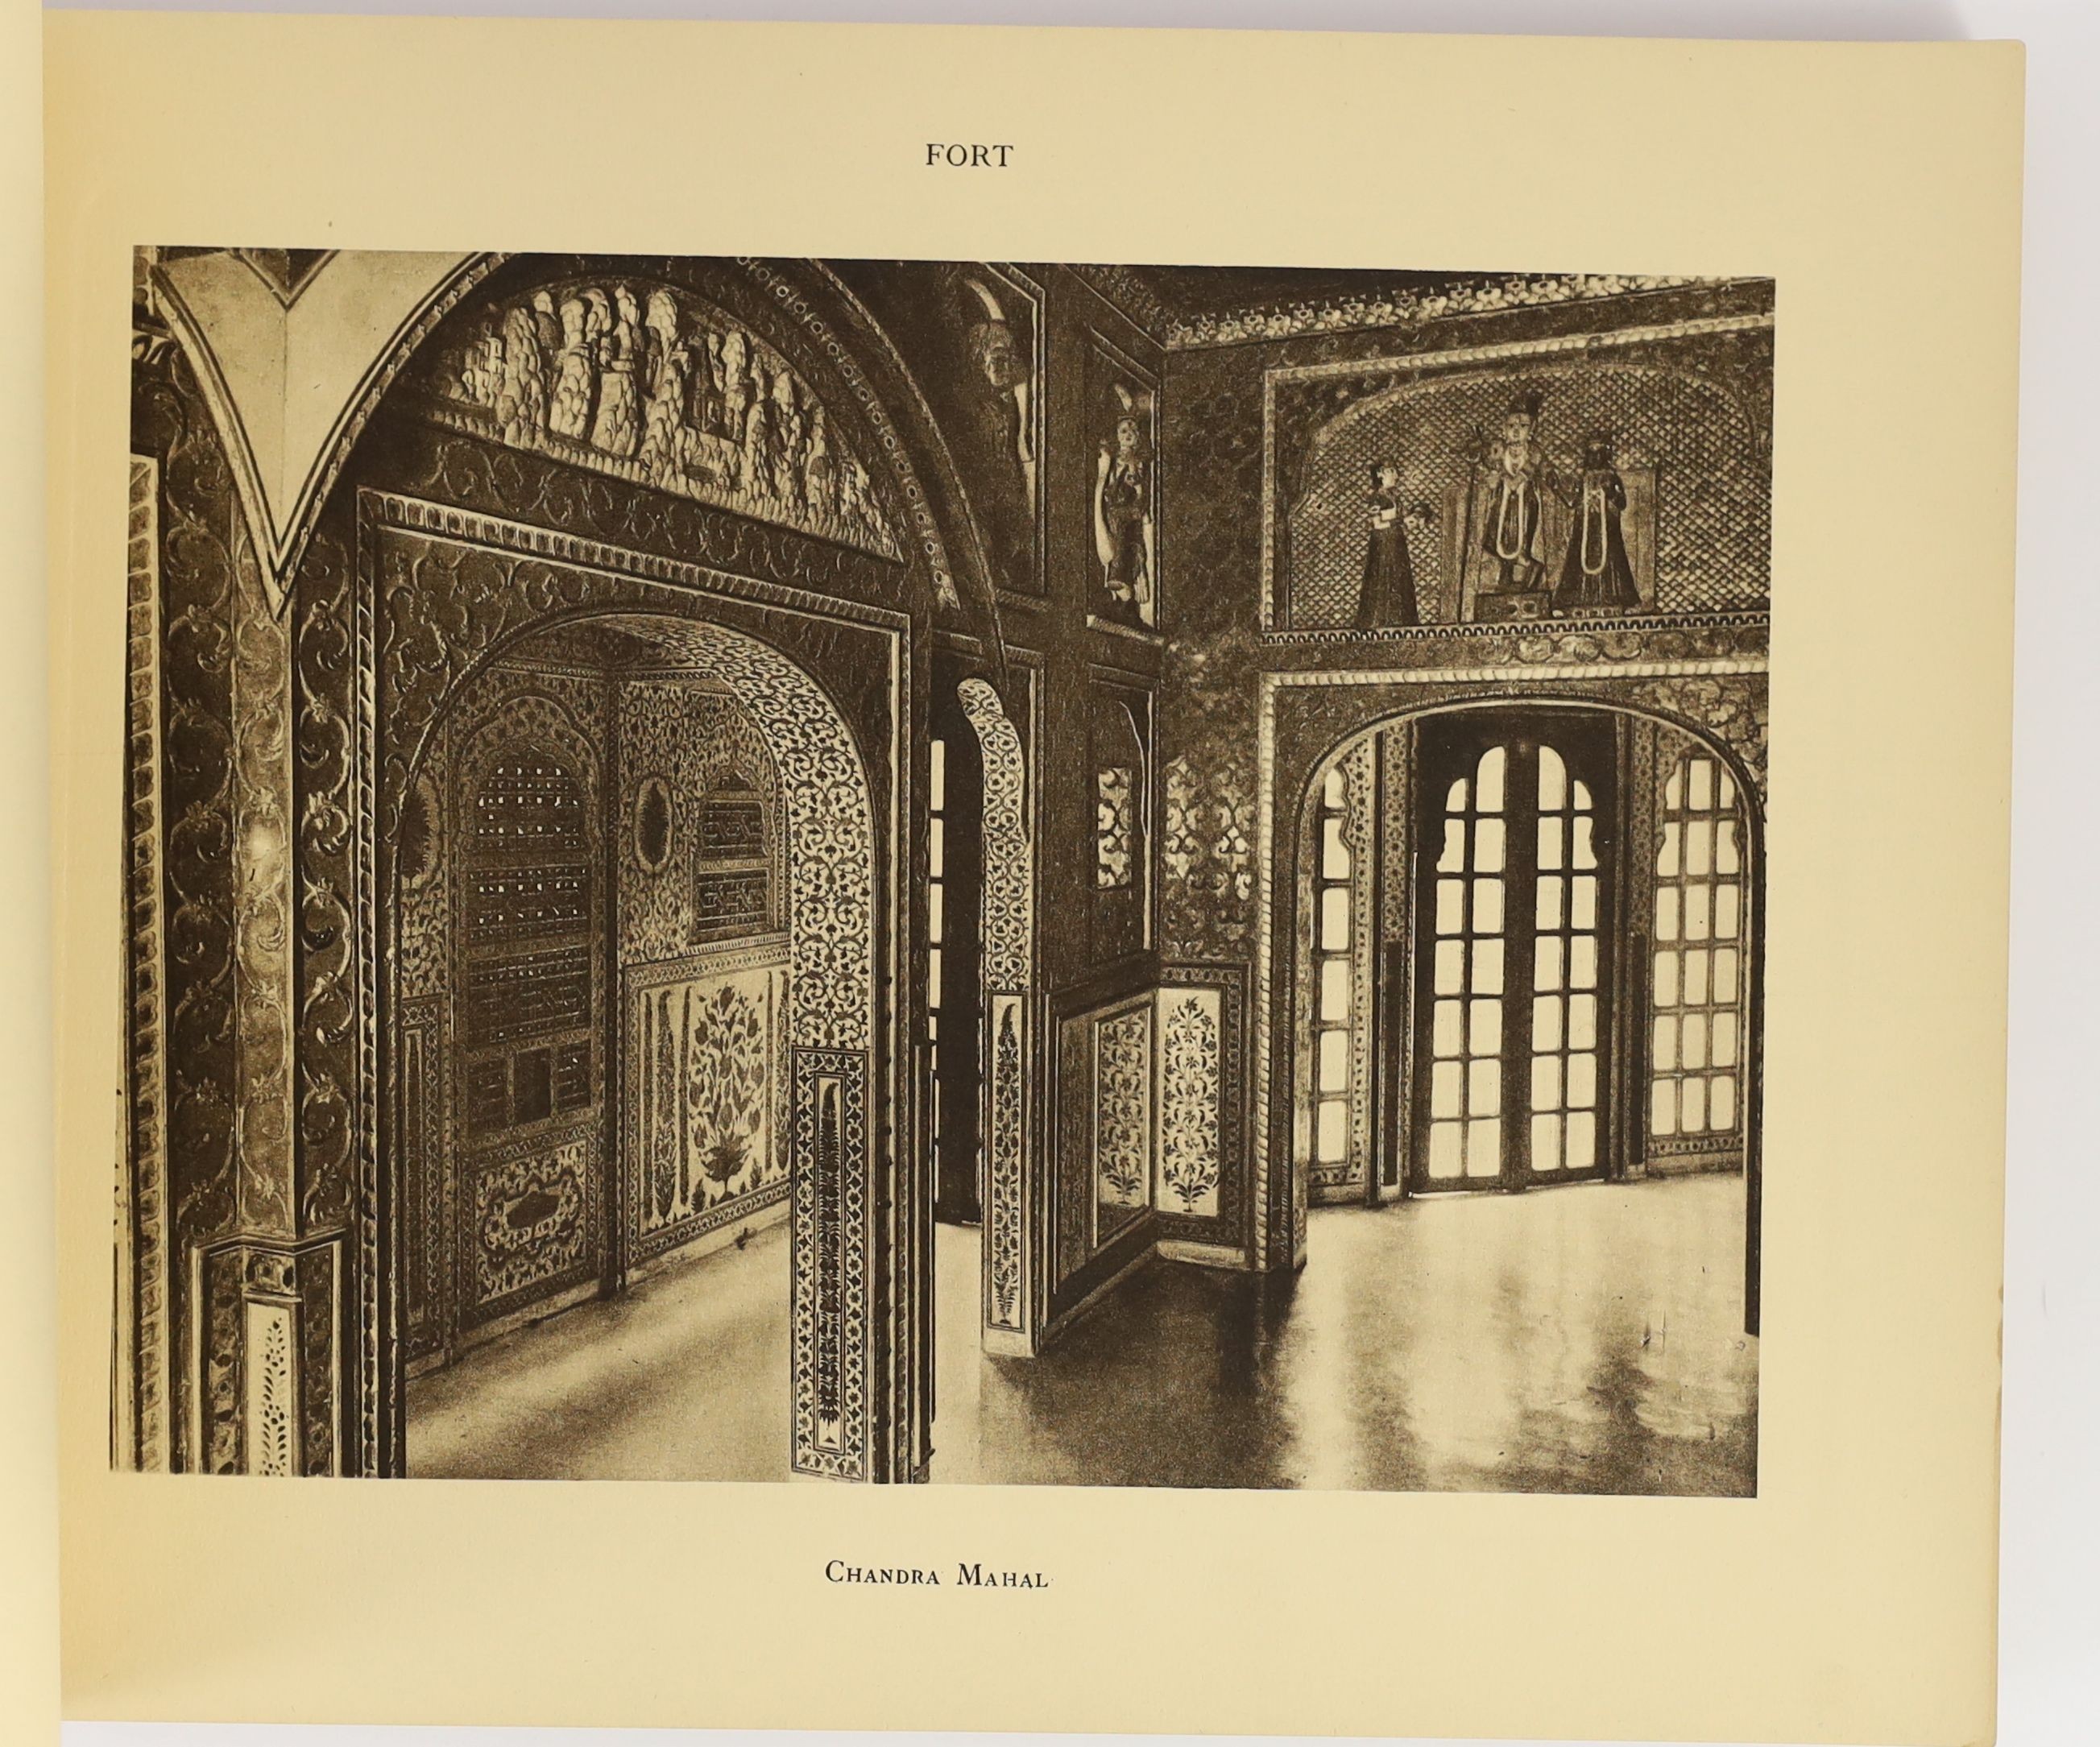 Bikaner State. Oblong folio, Editions de Luxe, Paris, n.d. [c.1930]. 50 leaves of sepia photographs in wrappers including, The Fort, Lallgarh Palace, Gajner [Palace] and Bikaner, first leaf detached. Front wrapper and th